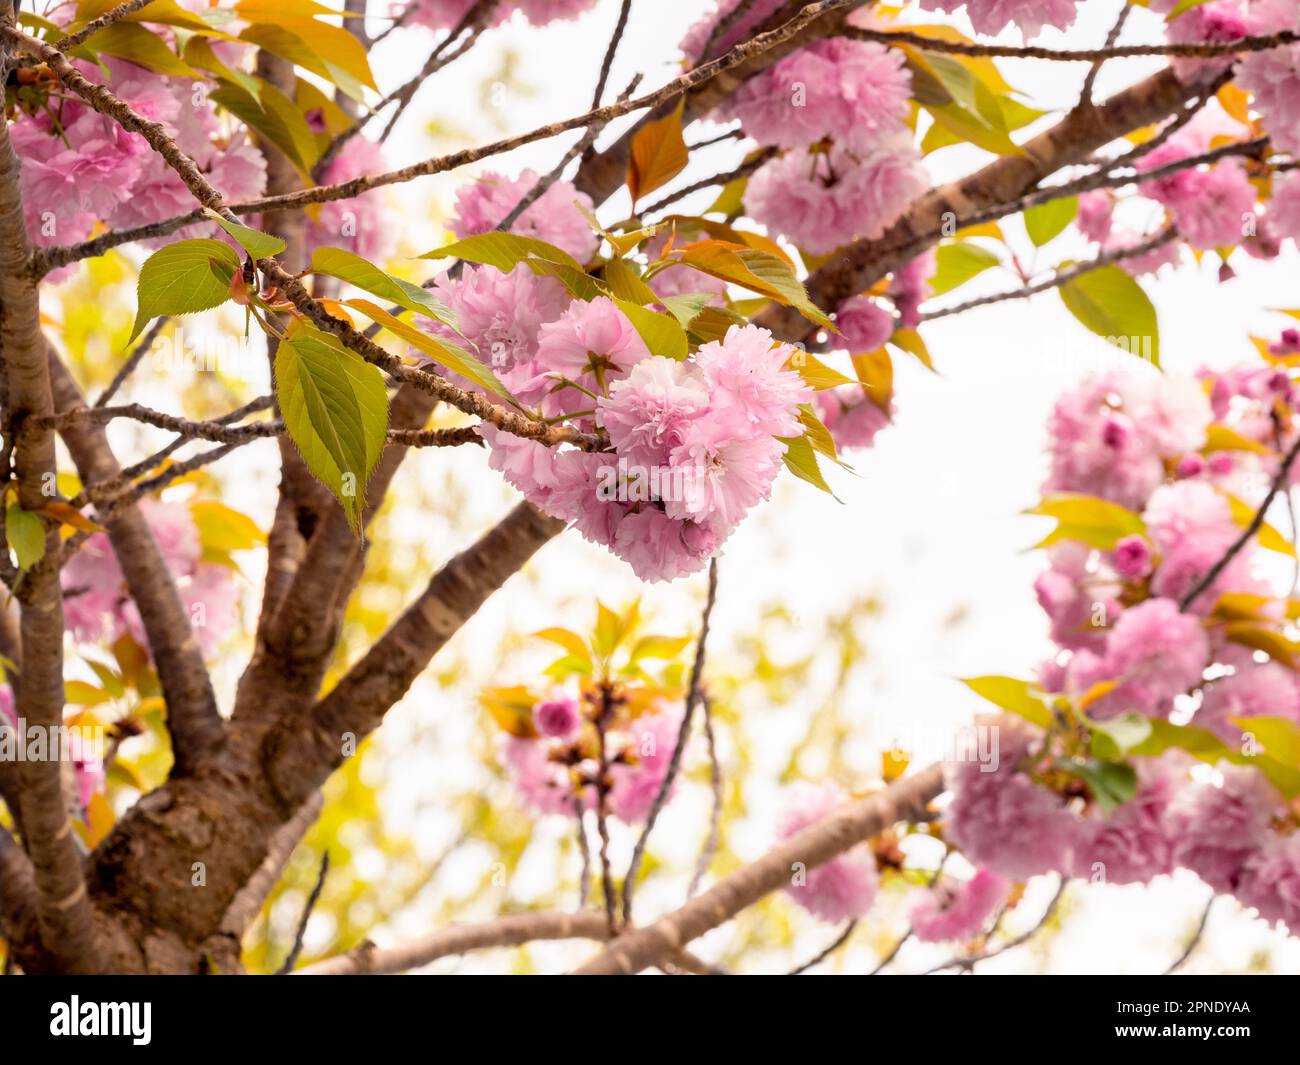 selective focus of a Prunus serrulata 'Kanzan' (Japanese Flowering Cherry) with pink flowers in spring with blurred background Stock Photo